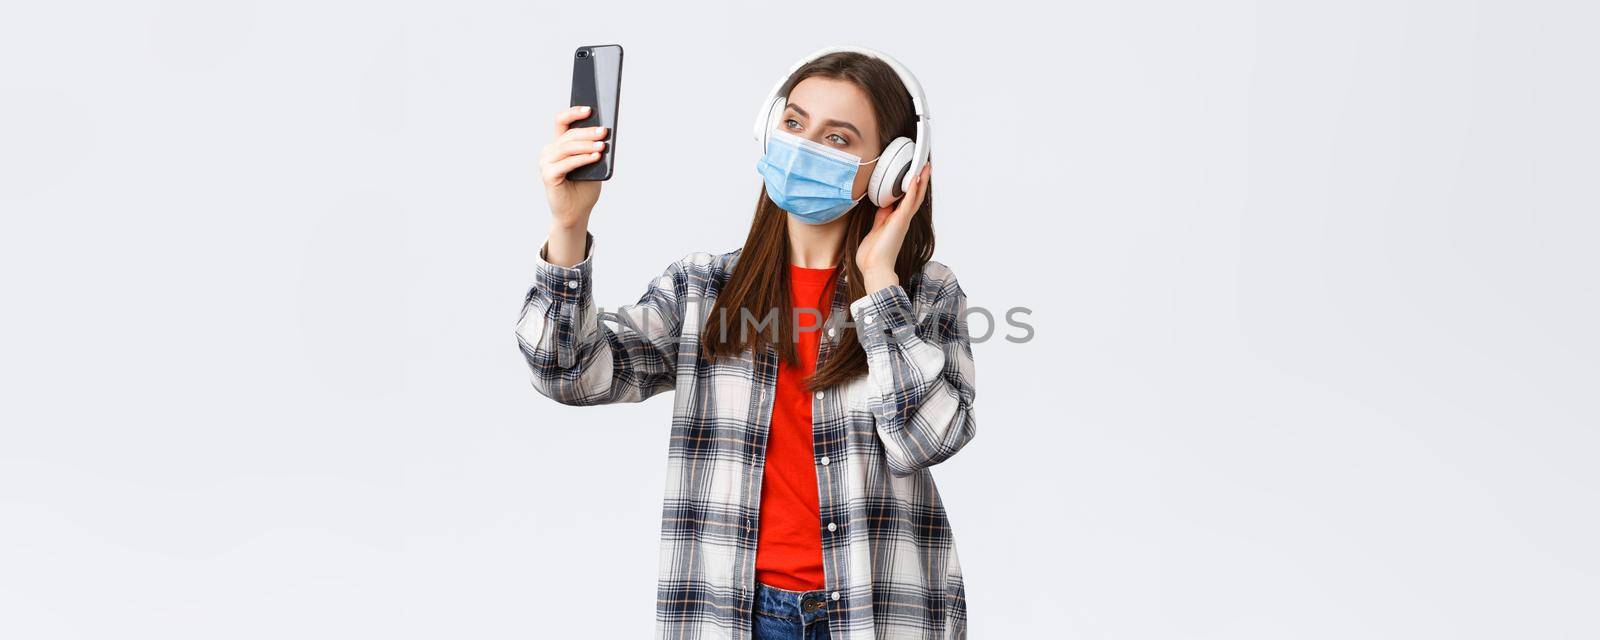 Social distancing, leisure and lifestyle on covid-19 outbreak, coronavirus concept. Woman in headphones and medical mask listening music, taking selfie on mobile phone using filters.